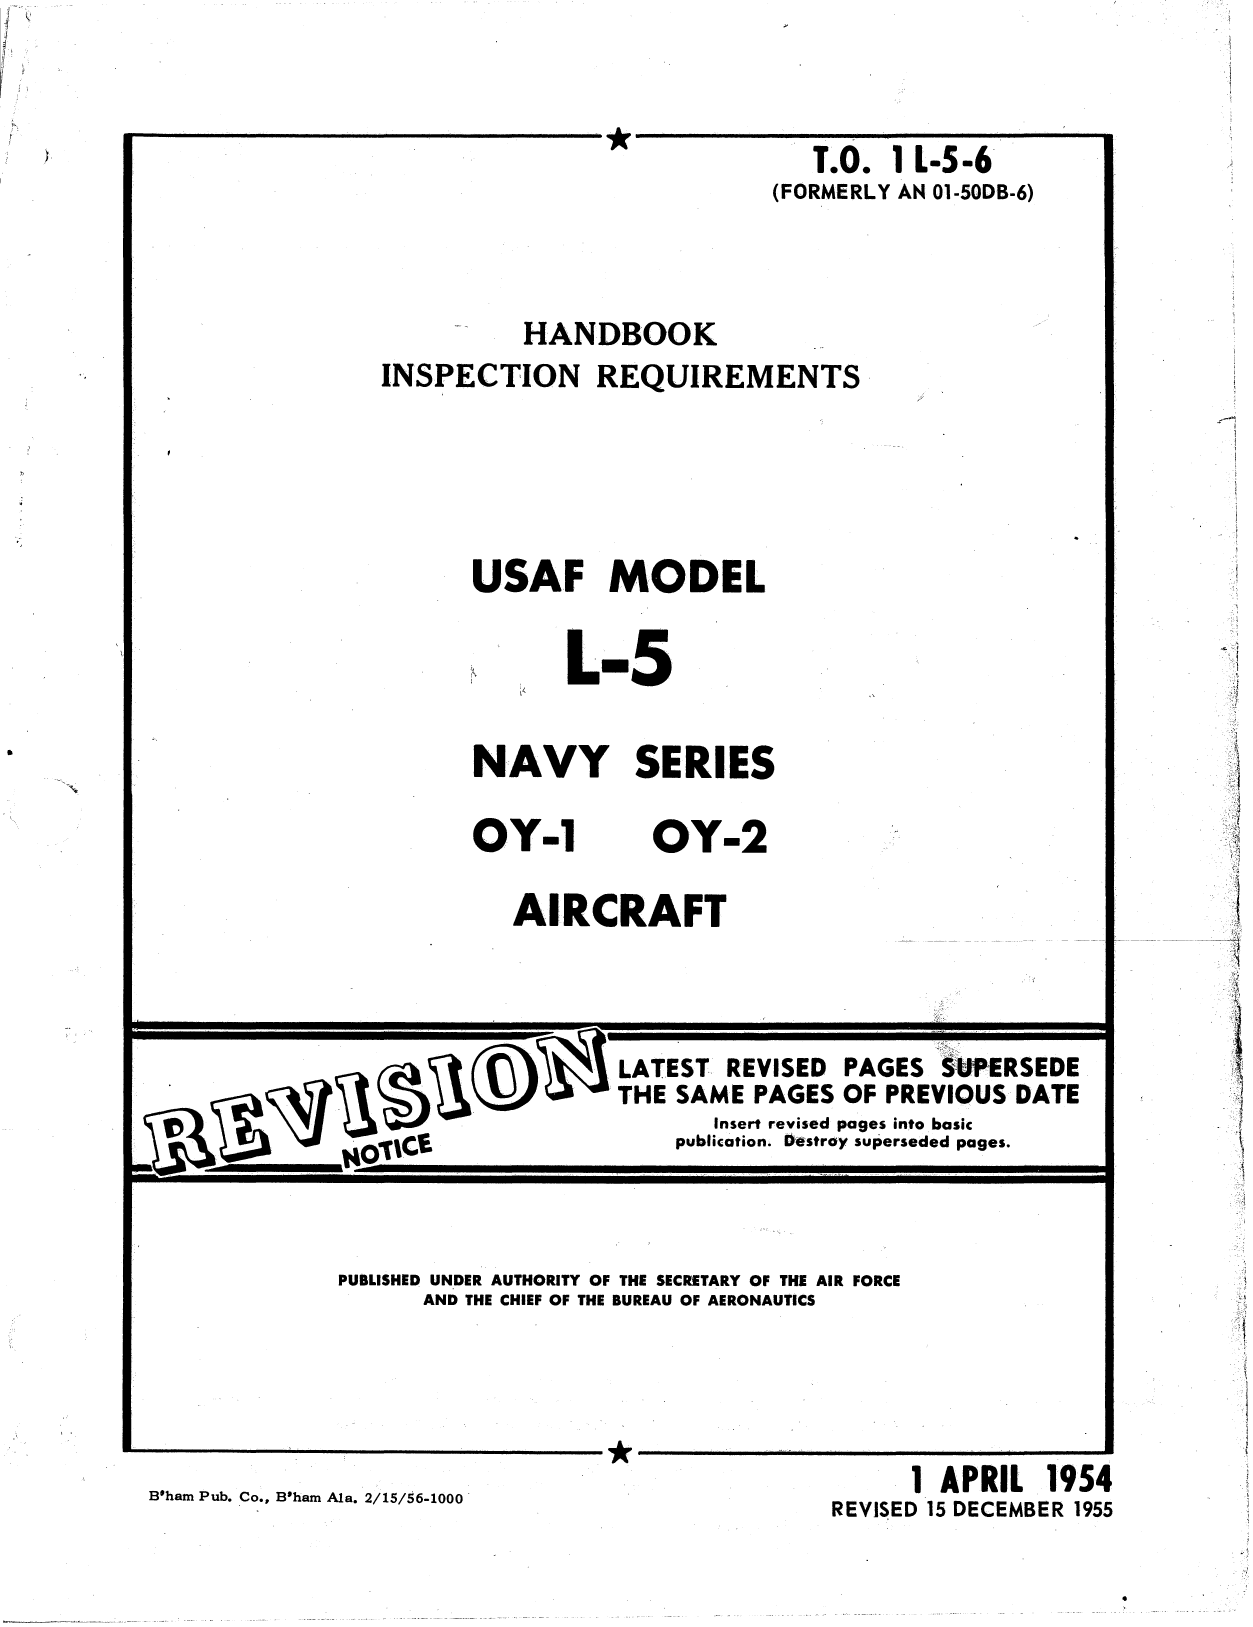 Sample page 1 from AirCorps Library document: Inspection Requirements - L-5, OY-1, OY-2